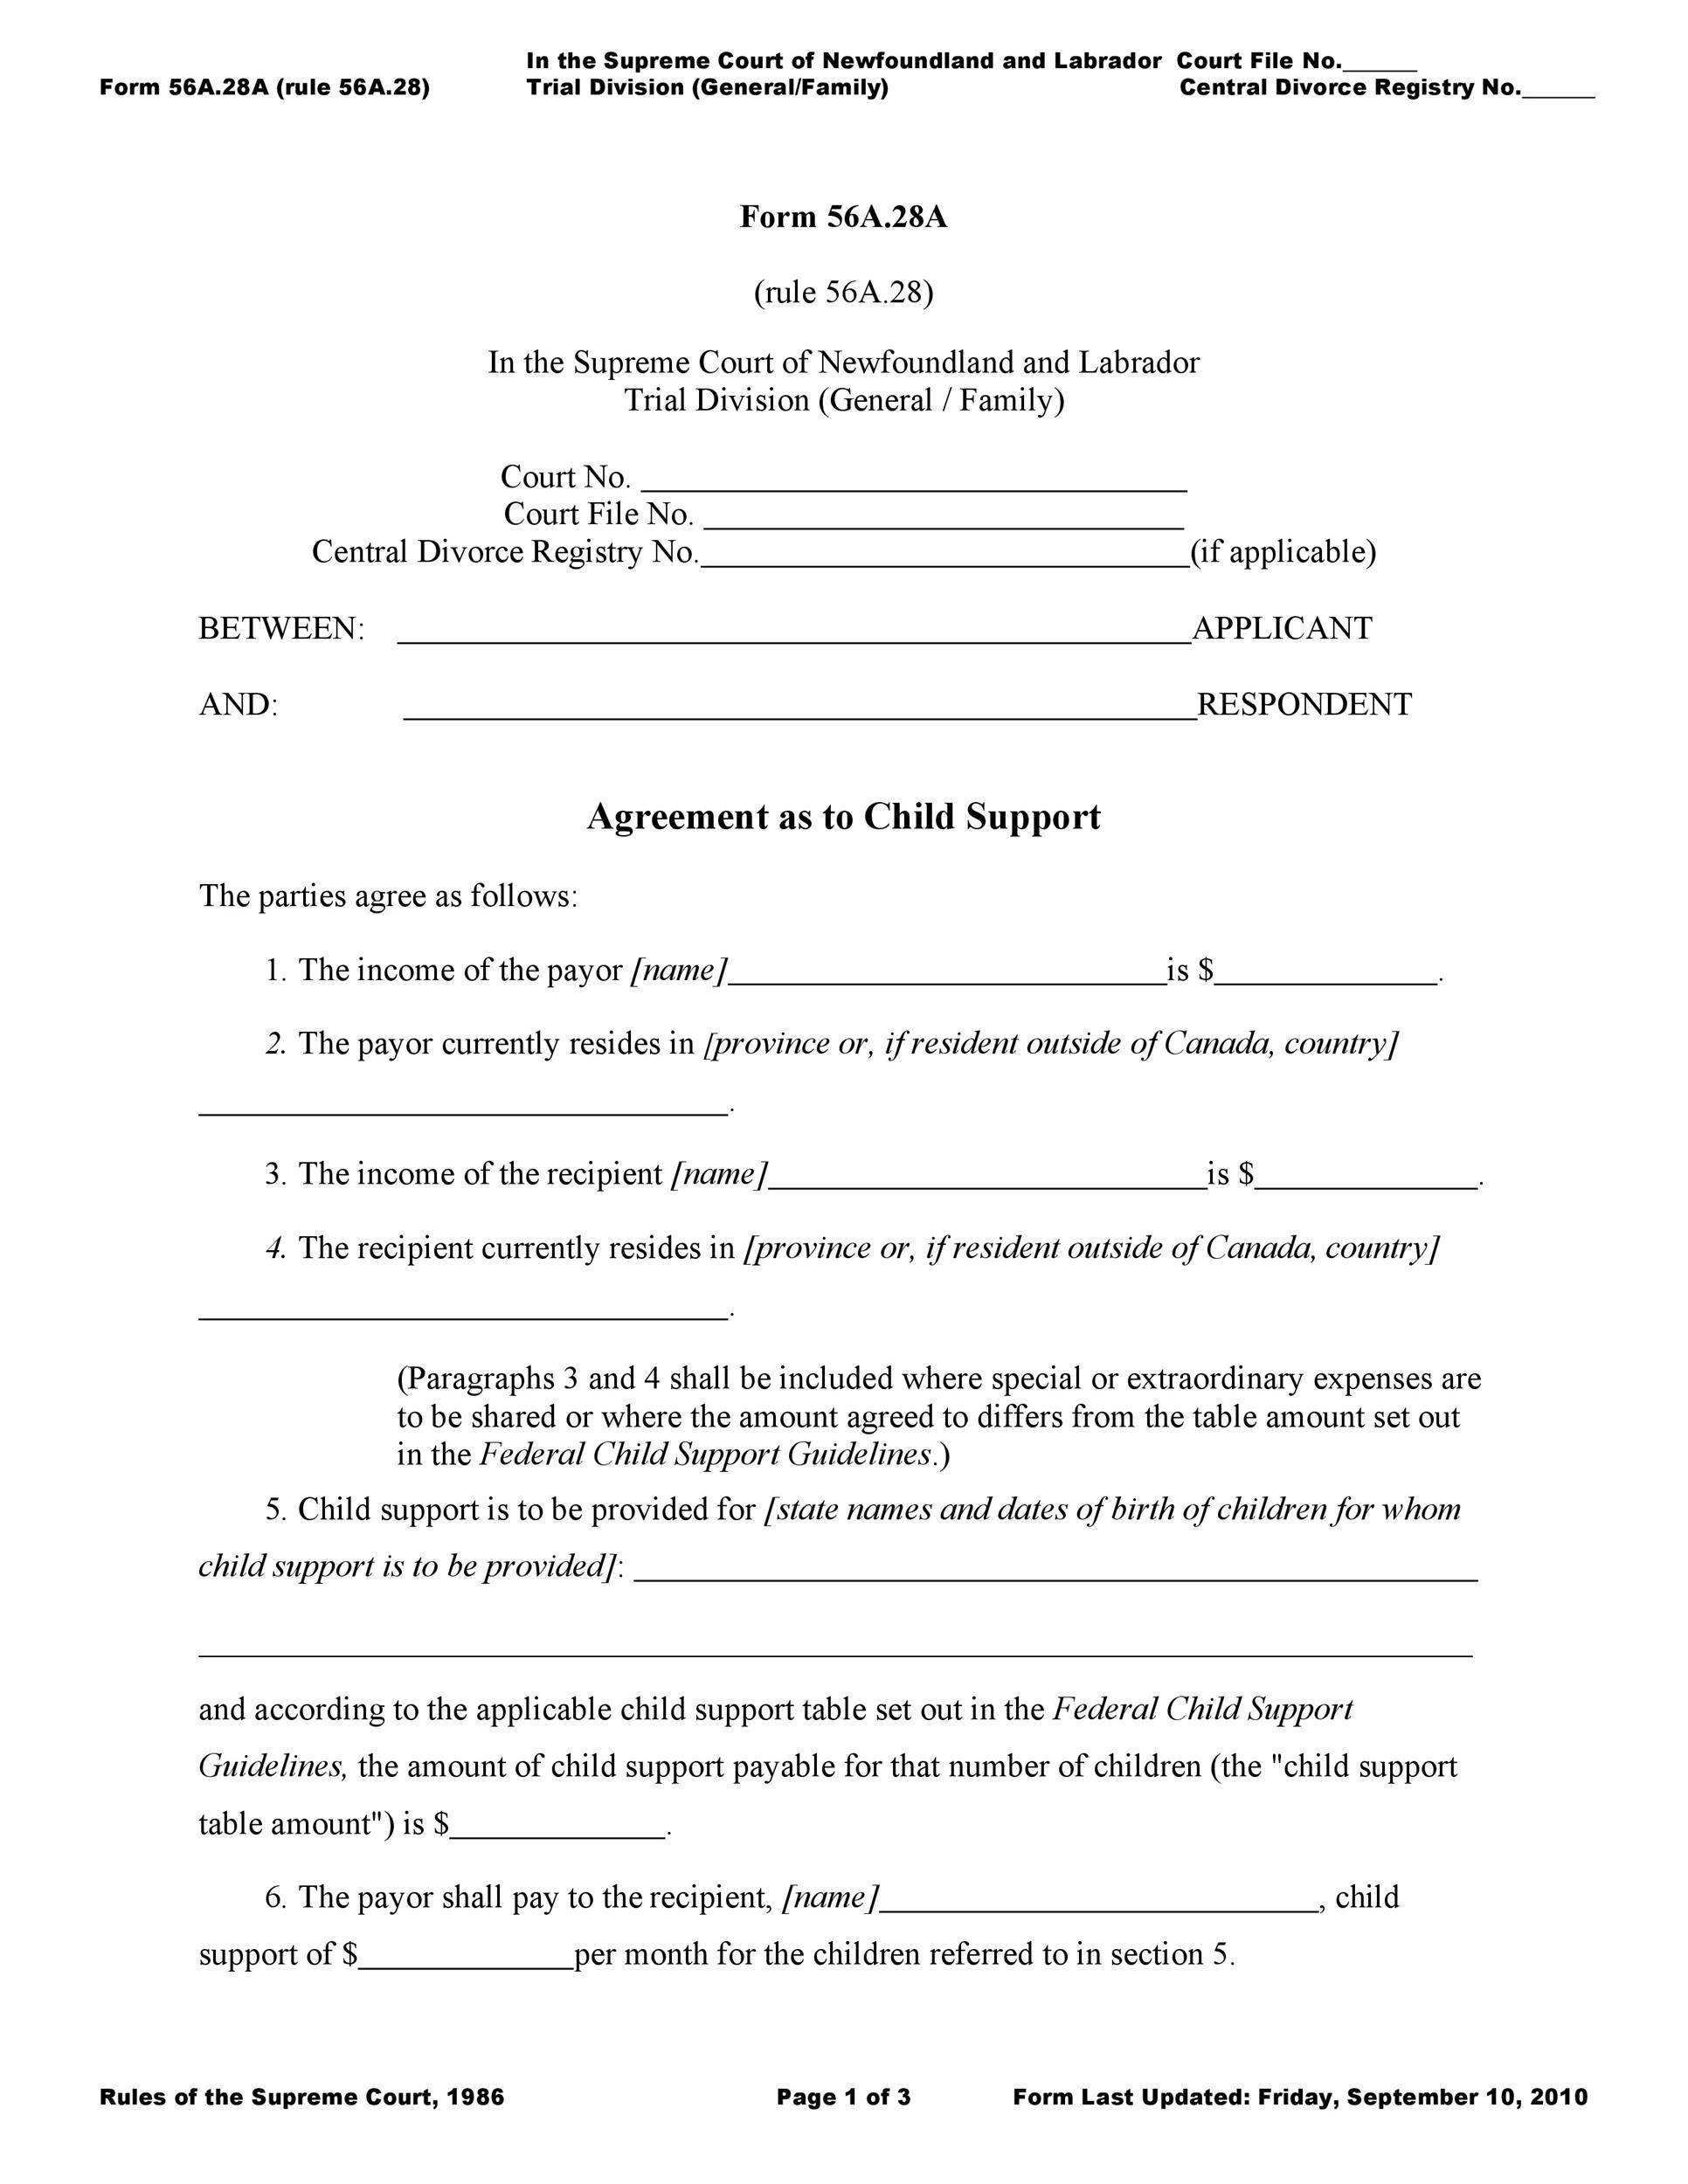 child-support-agreement-template-pdf-tutore-org-master-of-documents